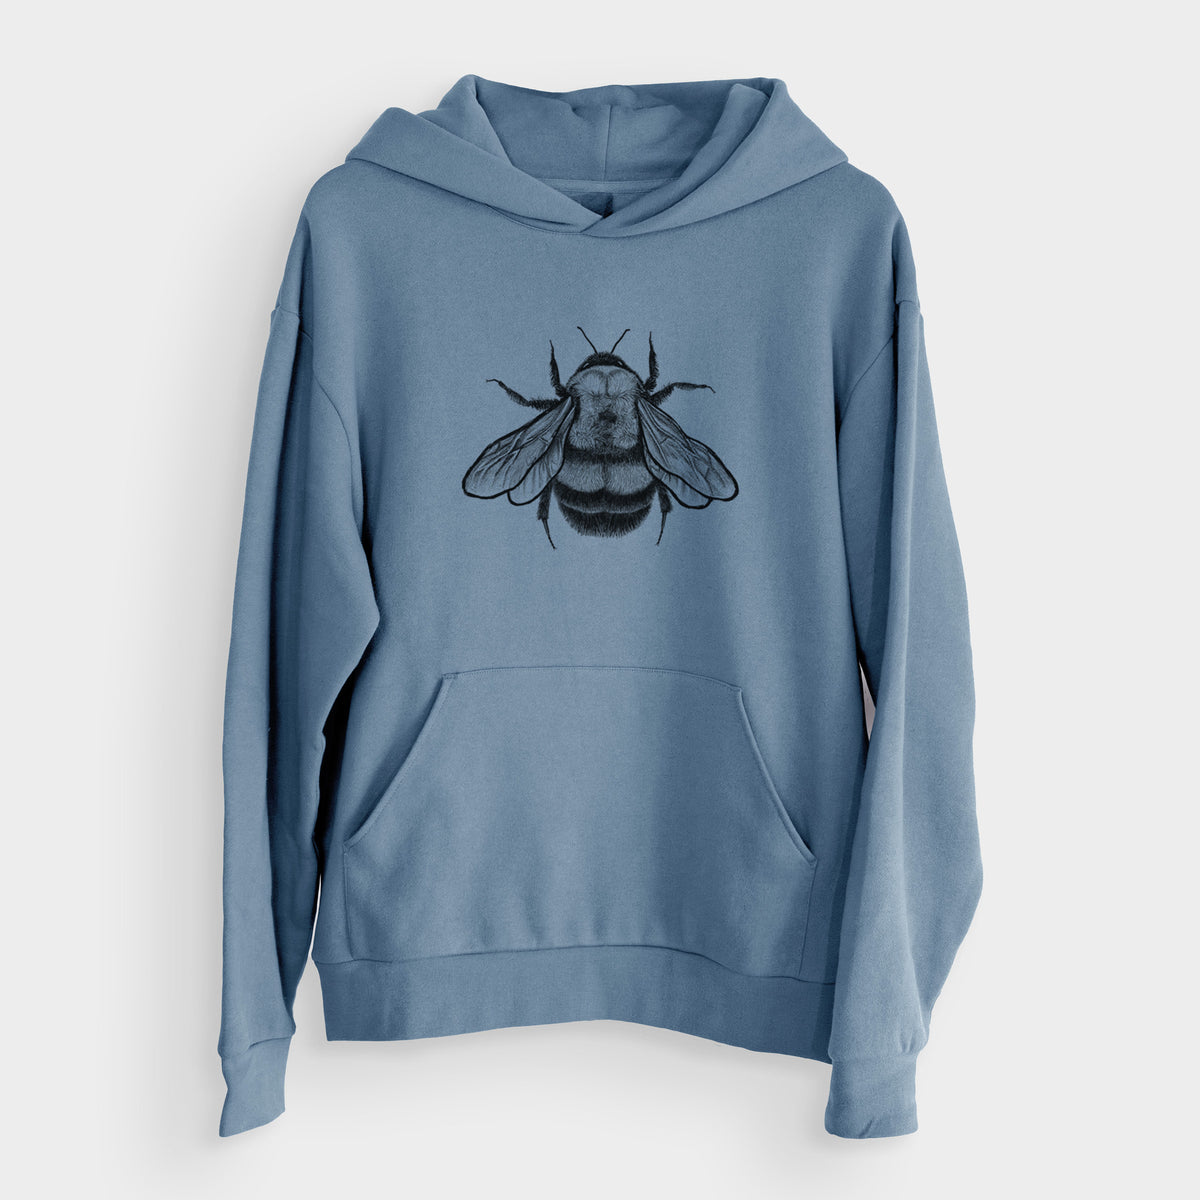 Bombus Affinis - Rusty-Patched Bumble Bee  - Bodega Midweight Hoodie